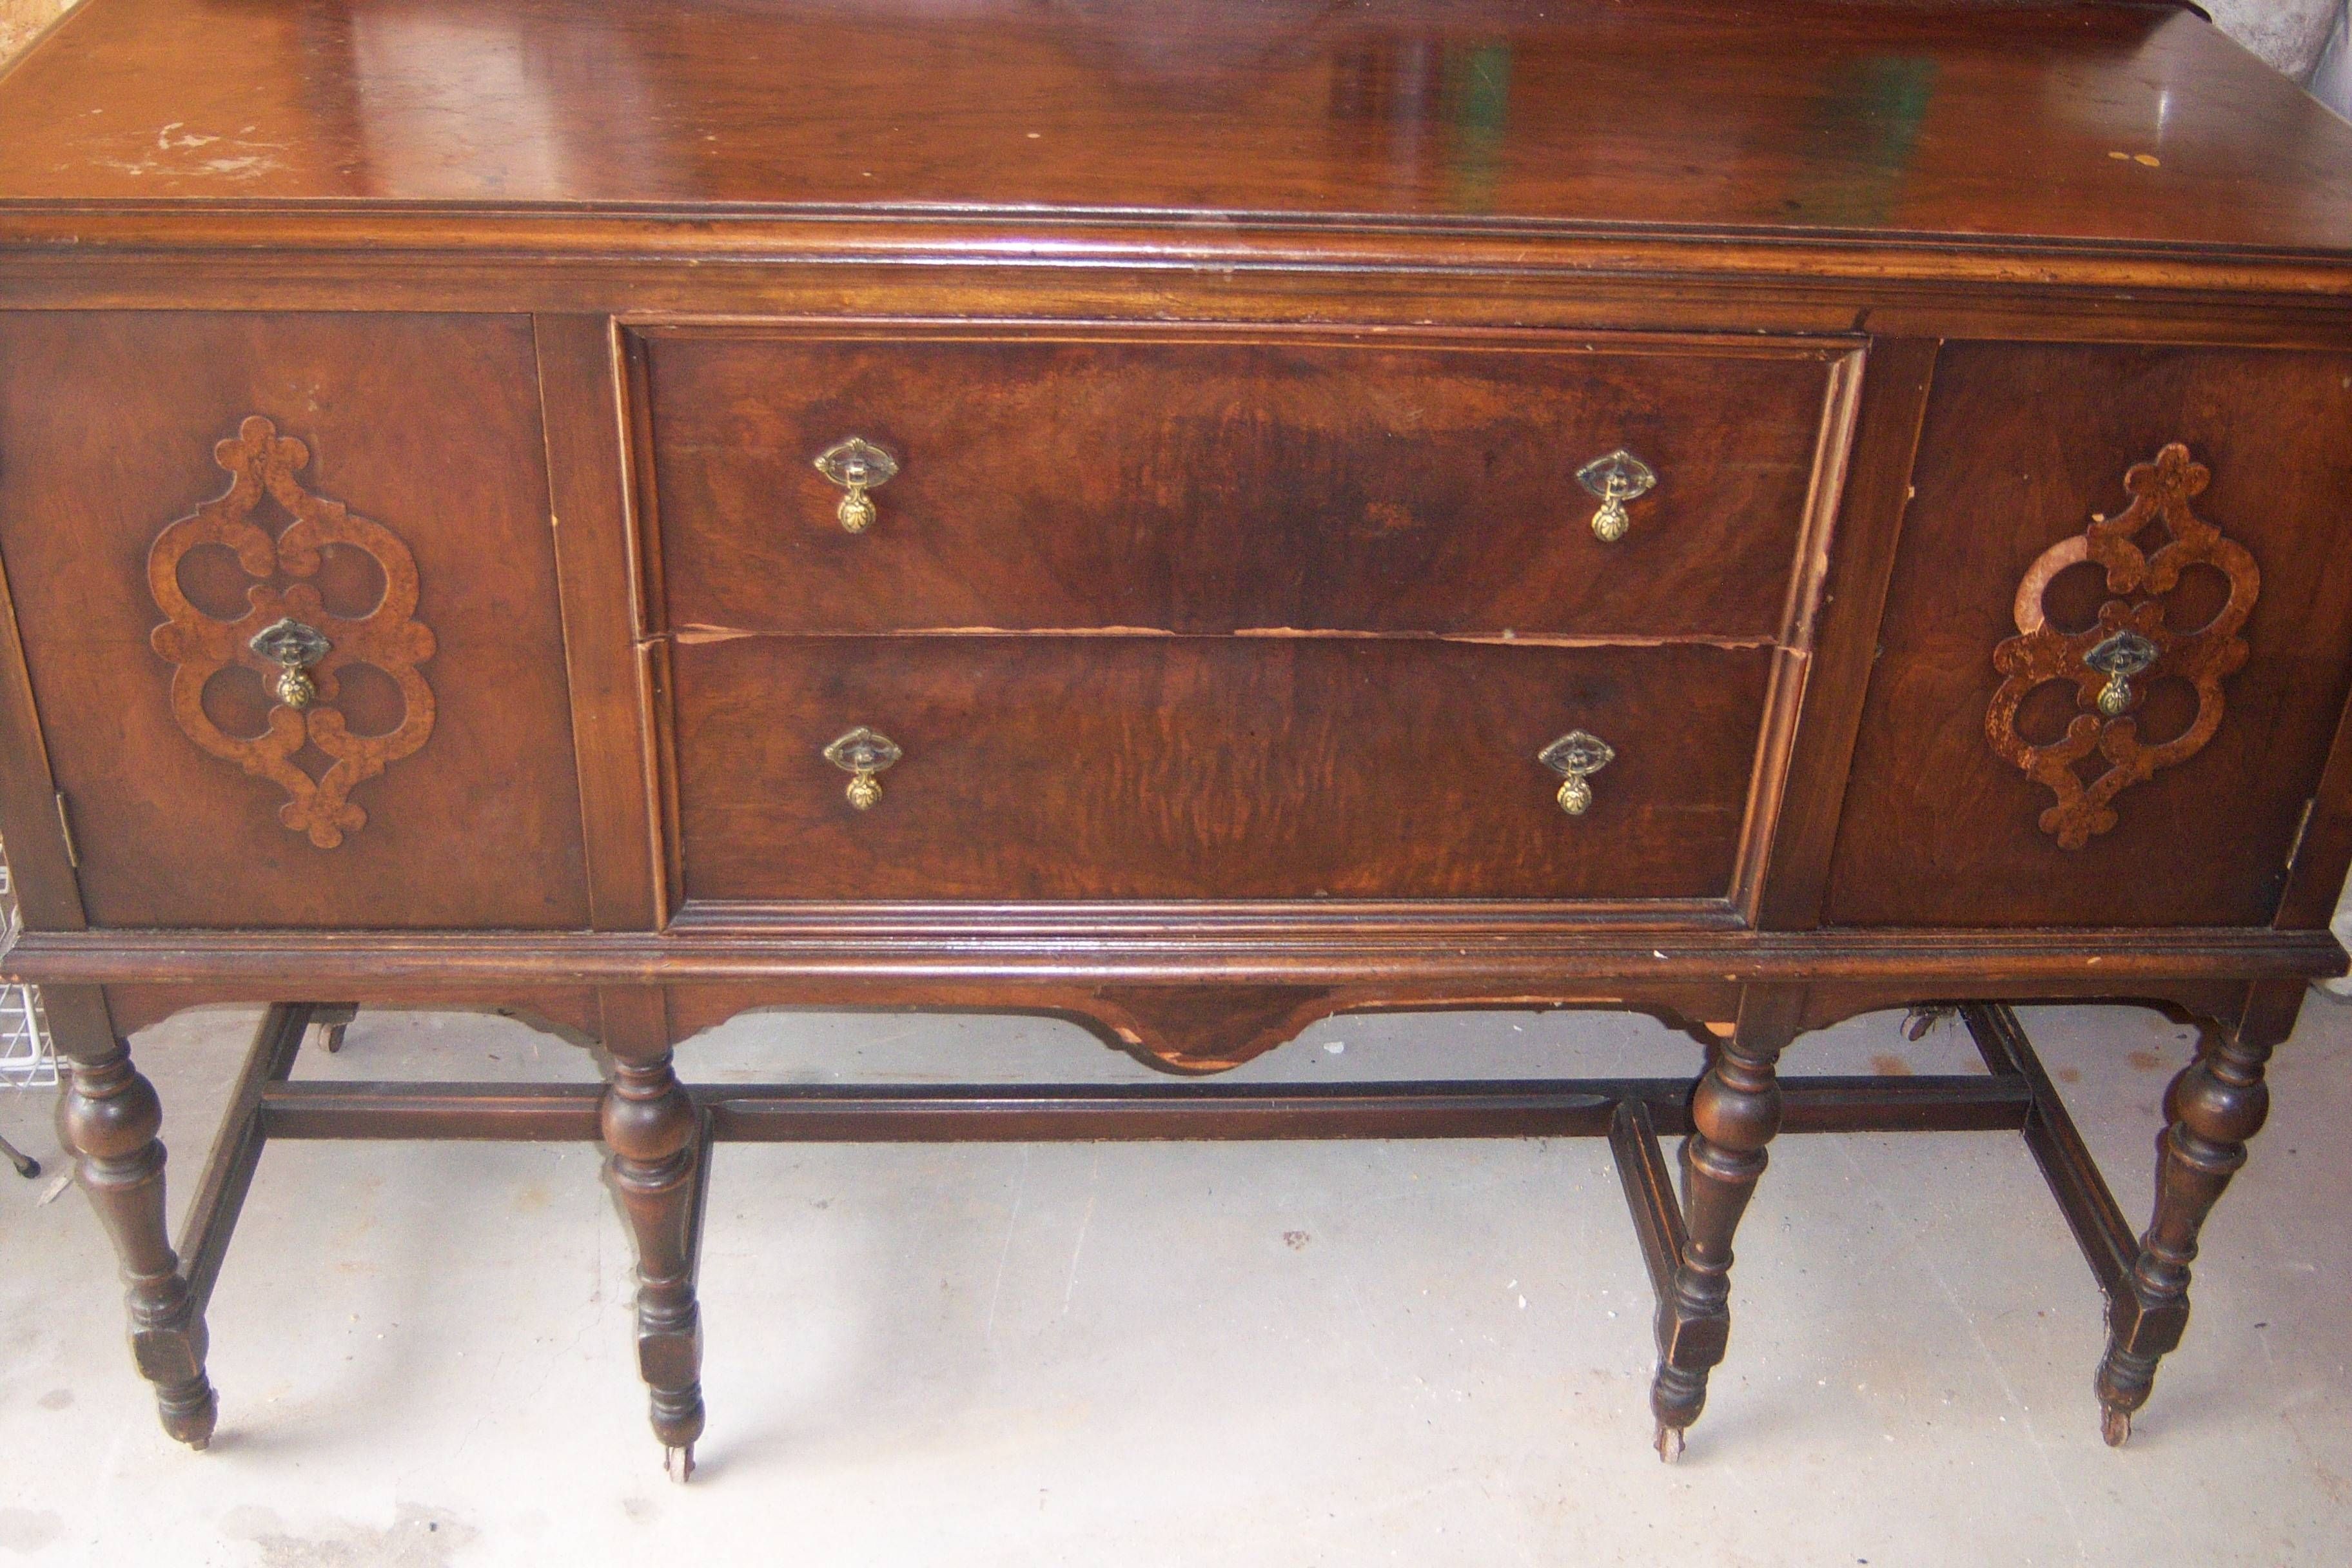 Antique Sideboard Buffet For Sale | Antiques | Classifieds Throughout Sideboards For Sale (Photo 3 of 20)